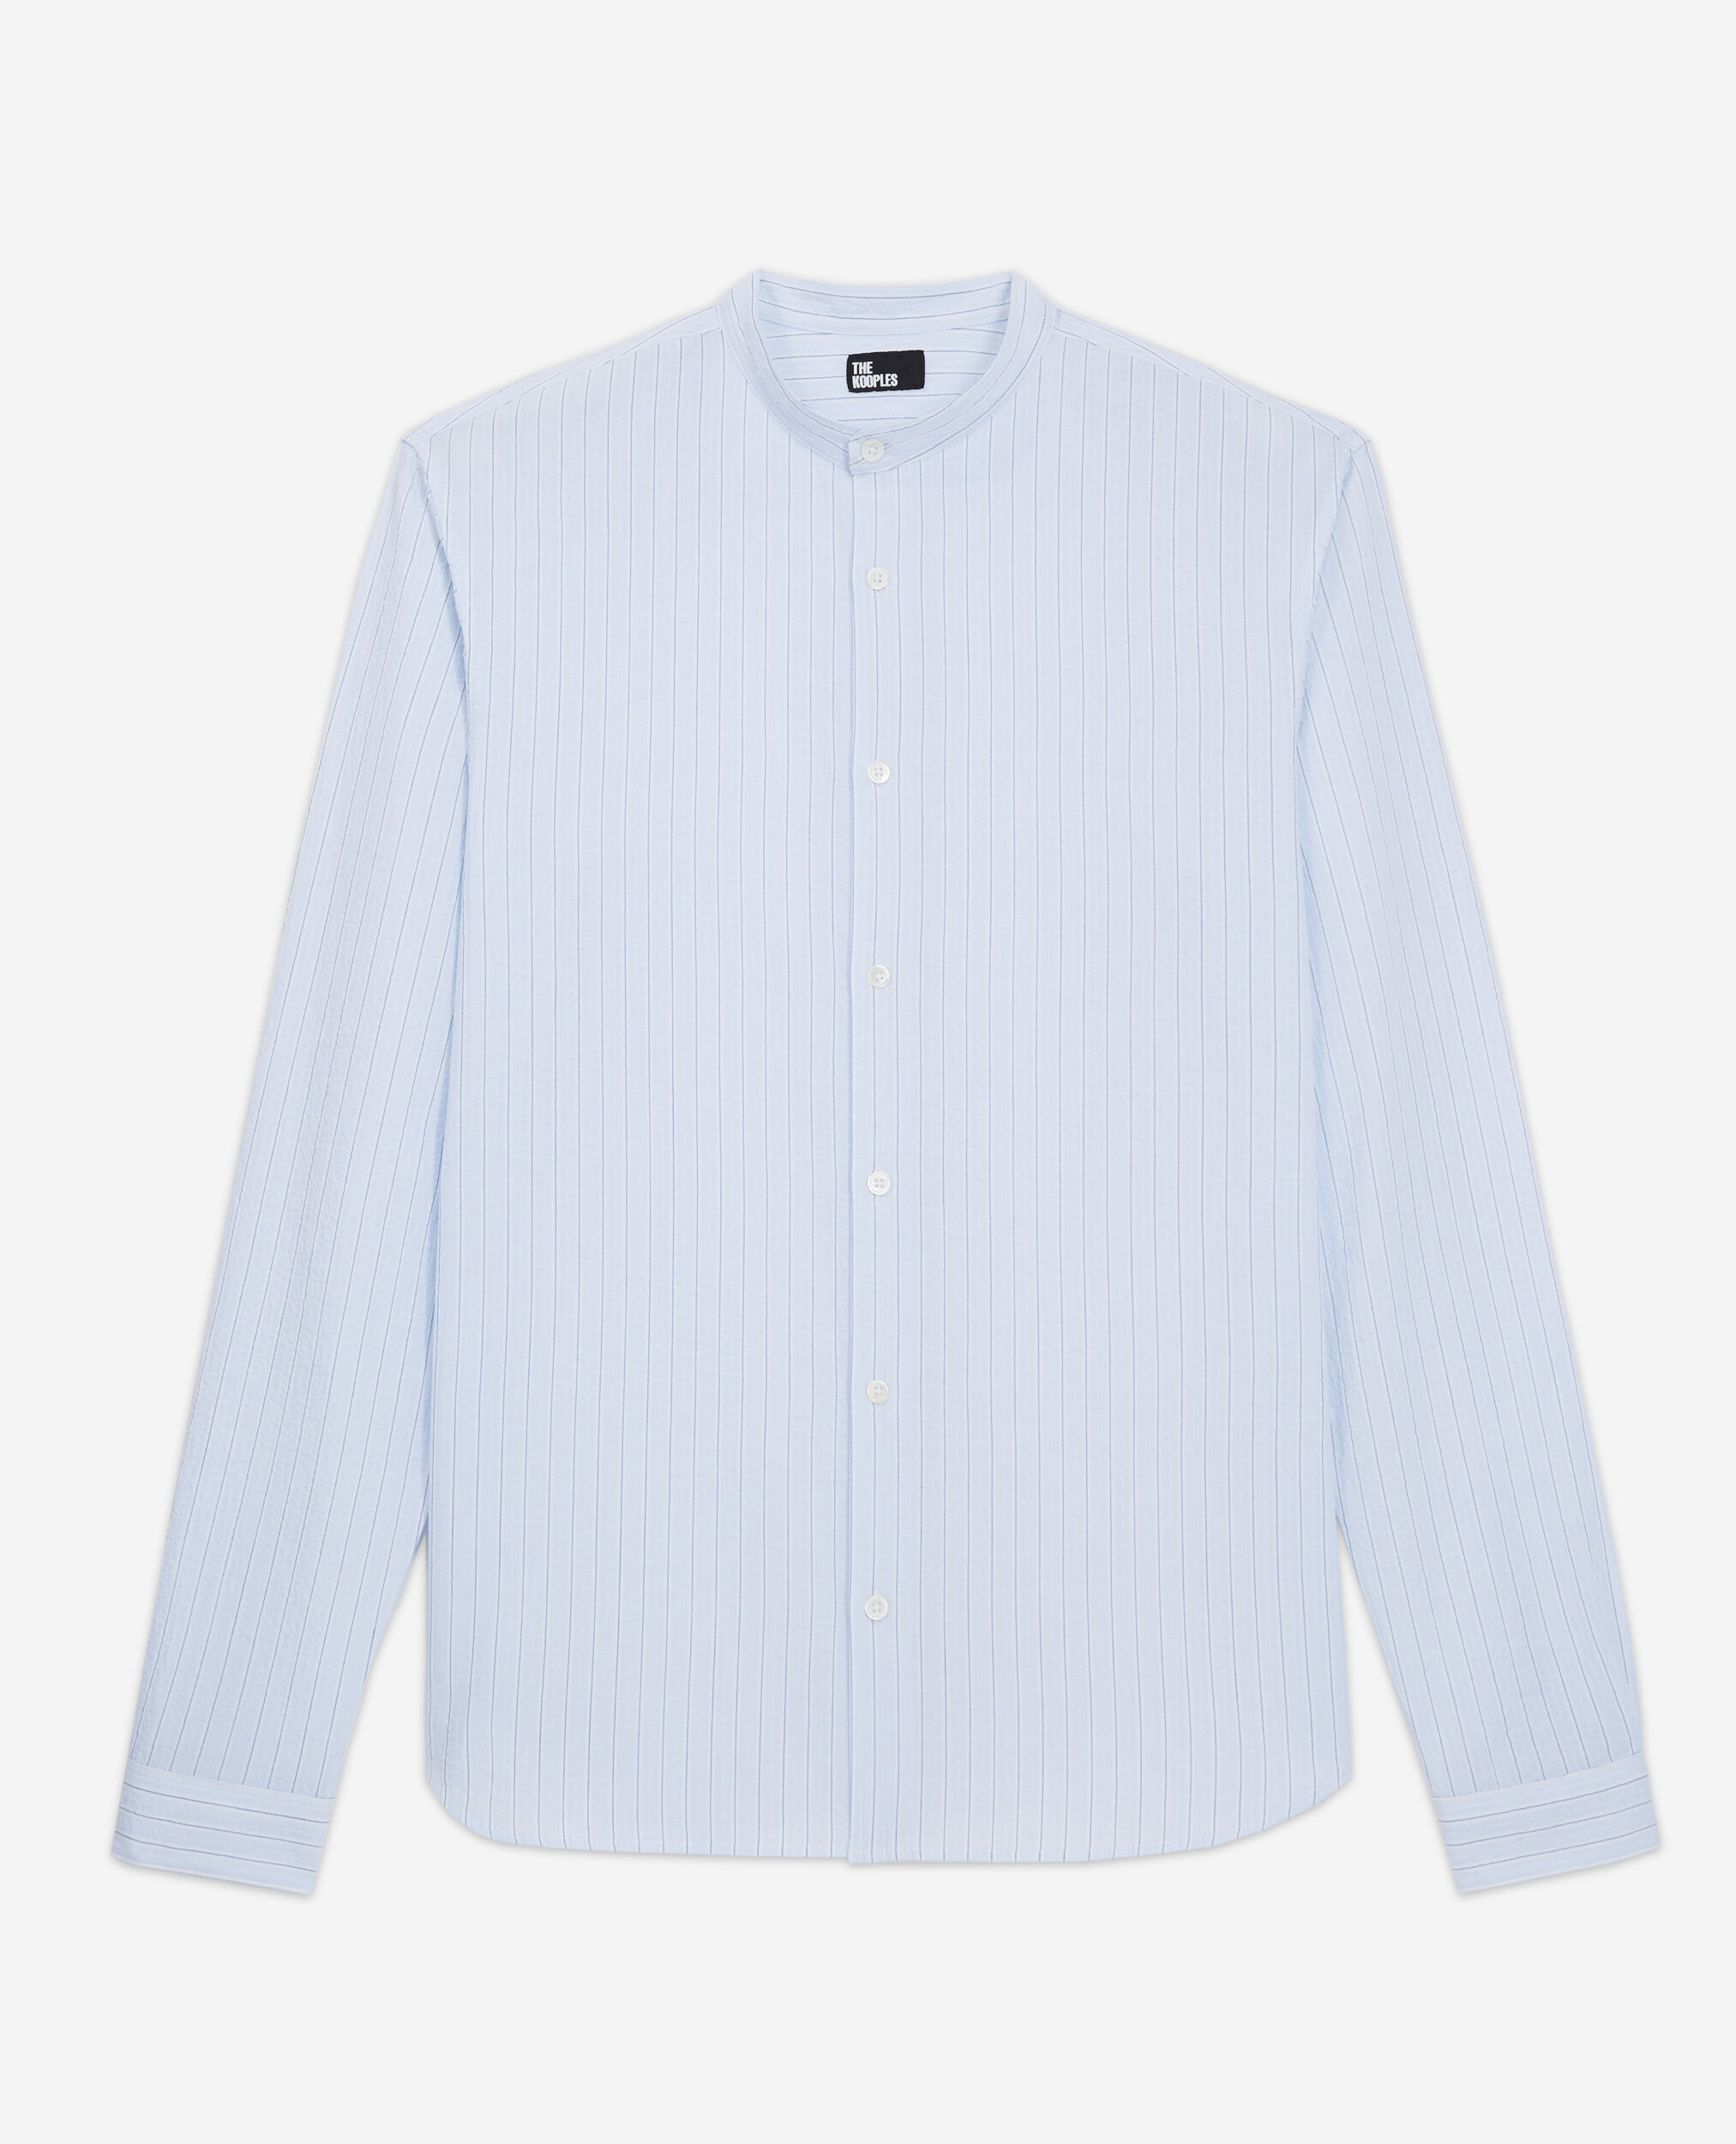 Chemise à rayures, WHITE / SKY BLUE, hi-res image number null